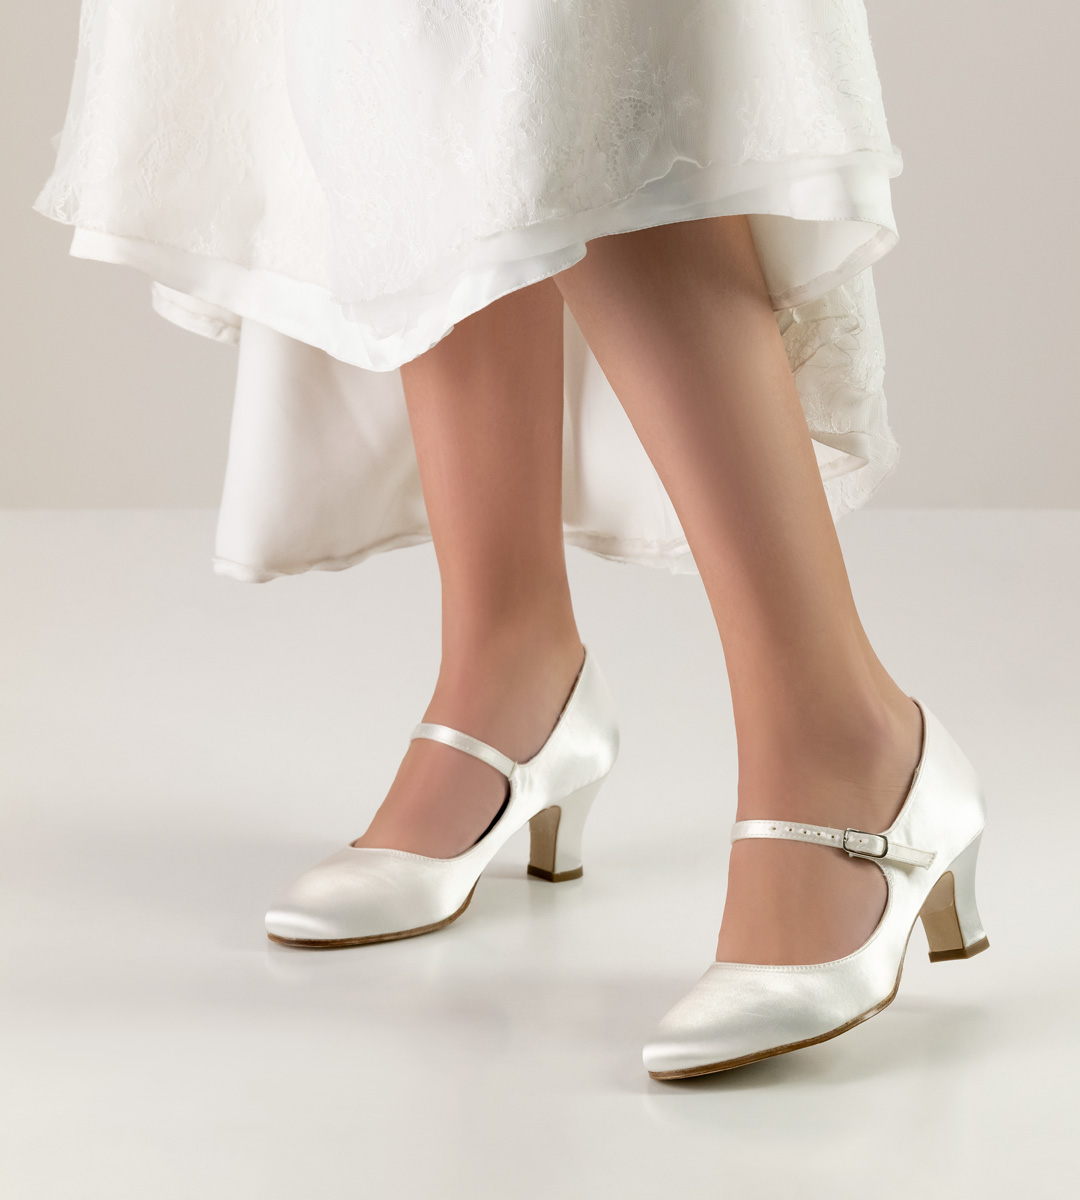 6 cm high bridal shoe with leather sole by Werner Kern in white 